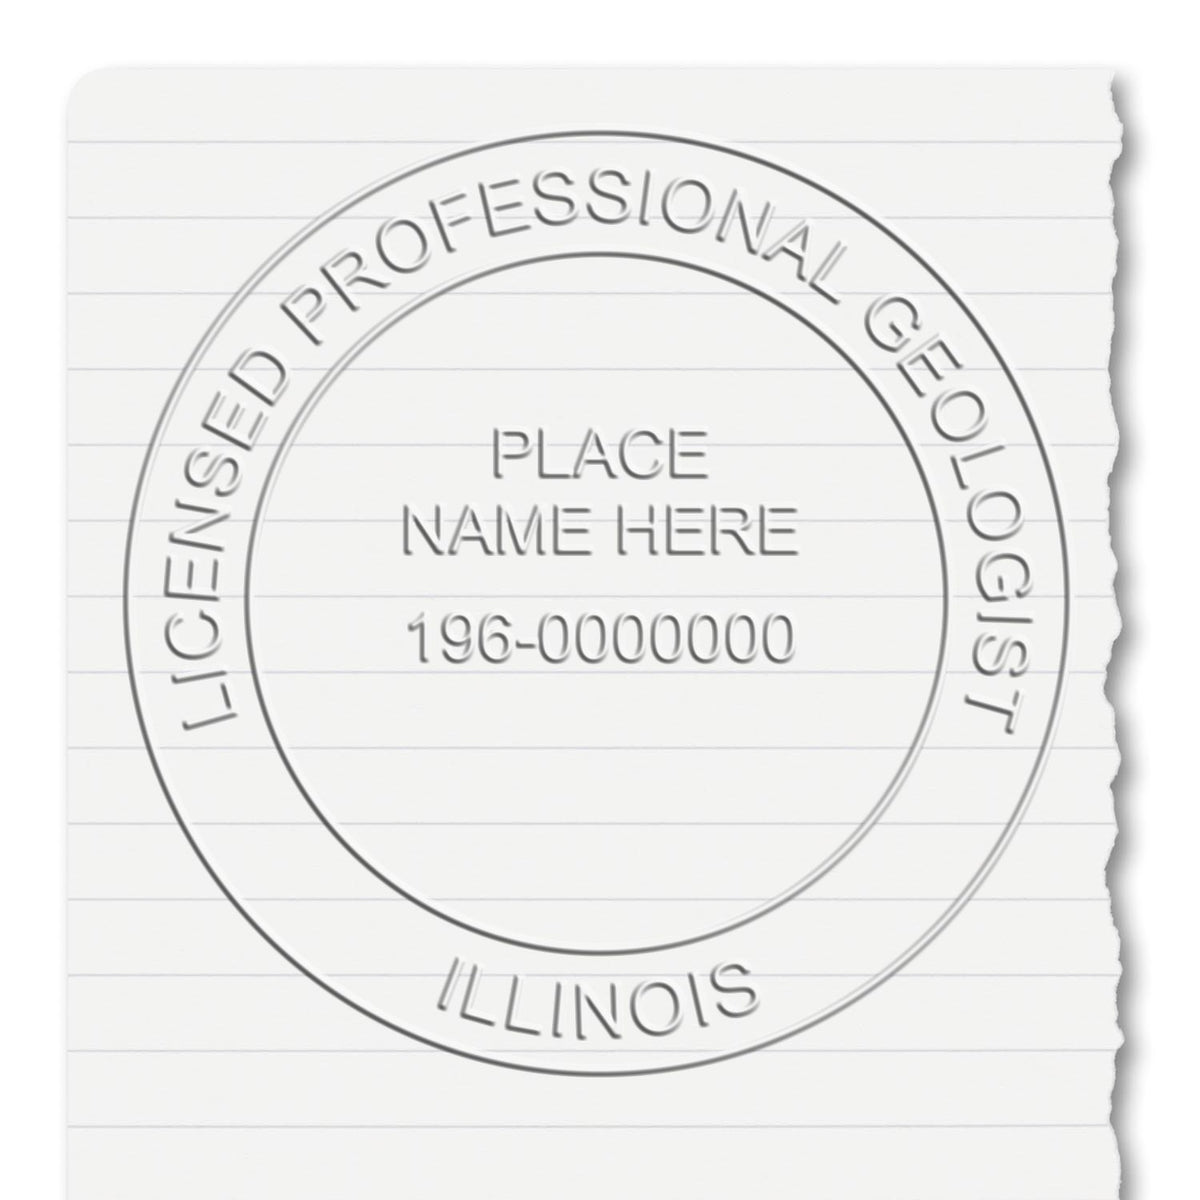 An in use photo of the Gift Illinois Geologist Seal showing a sample imprint on a cardstock